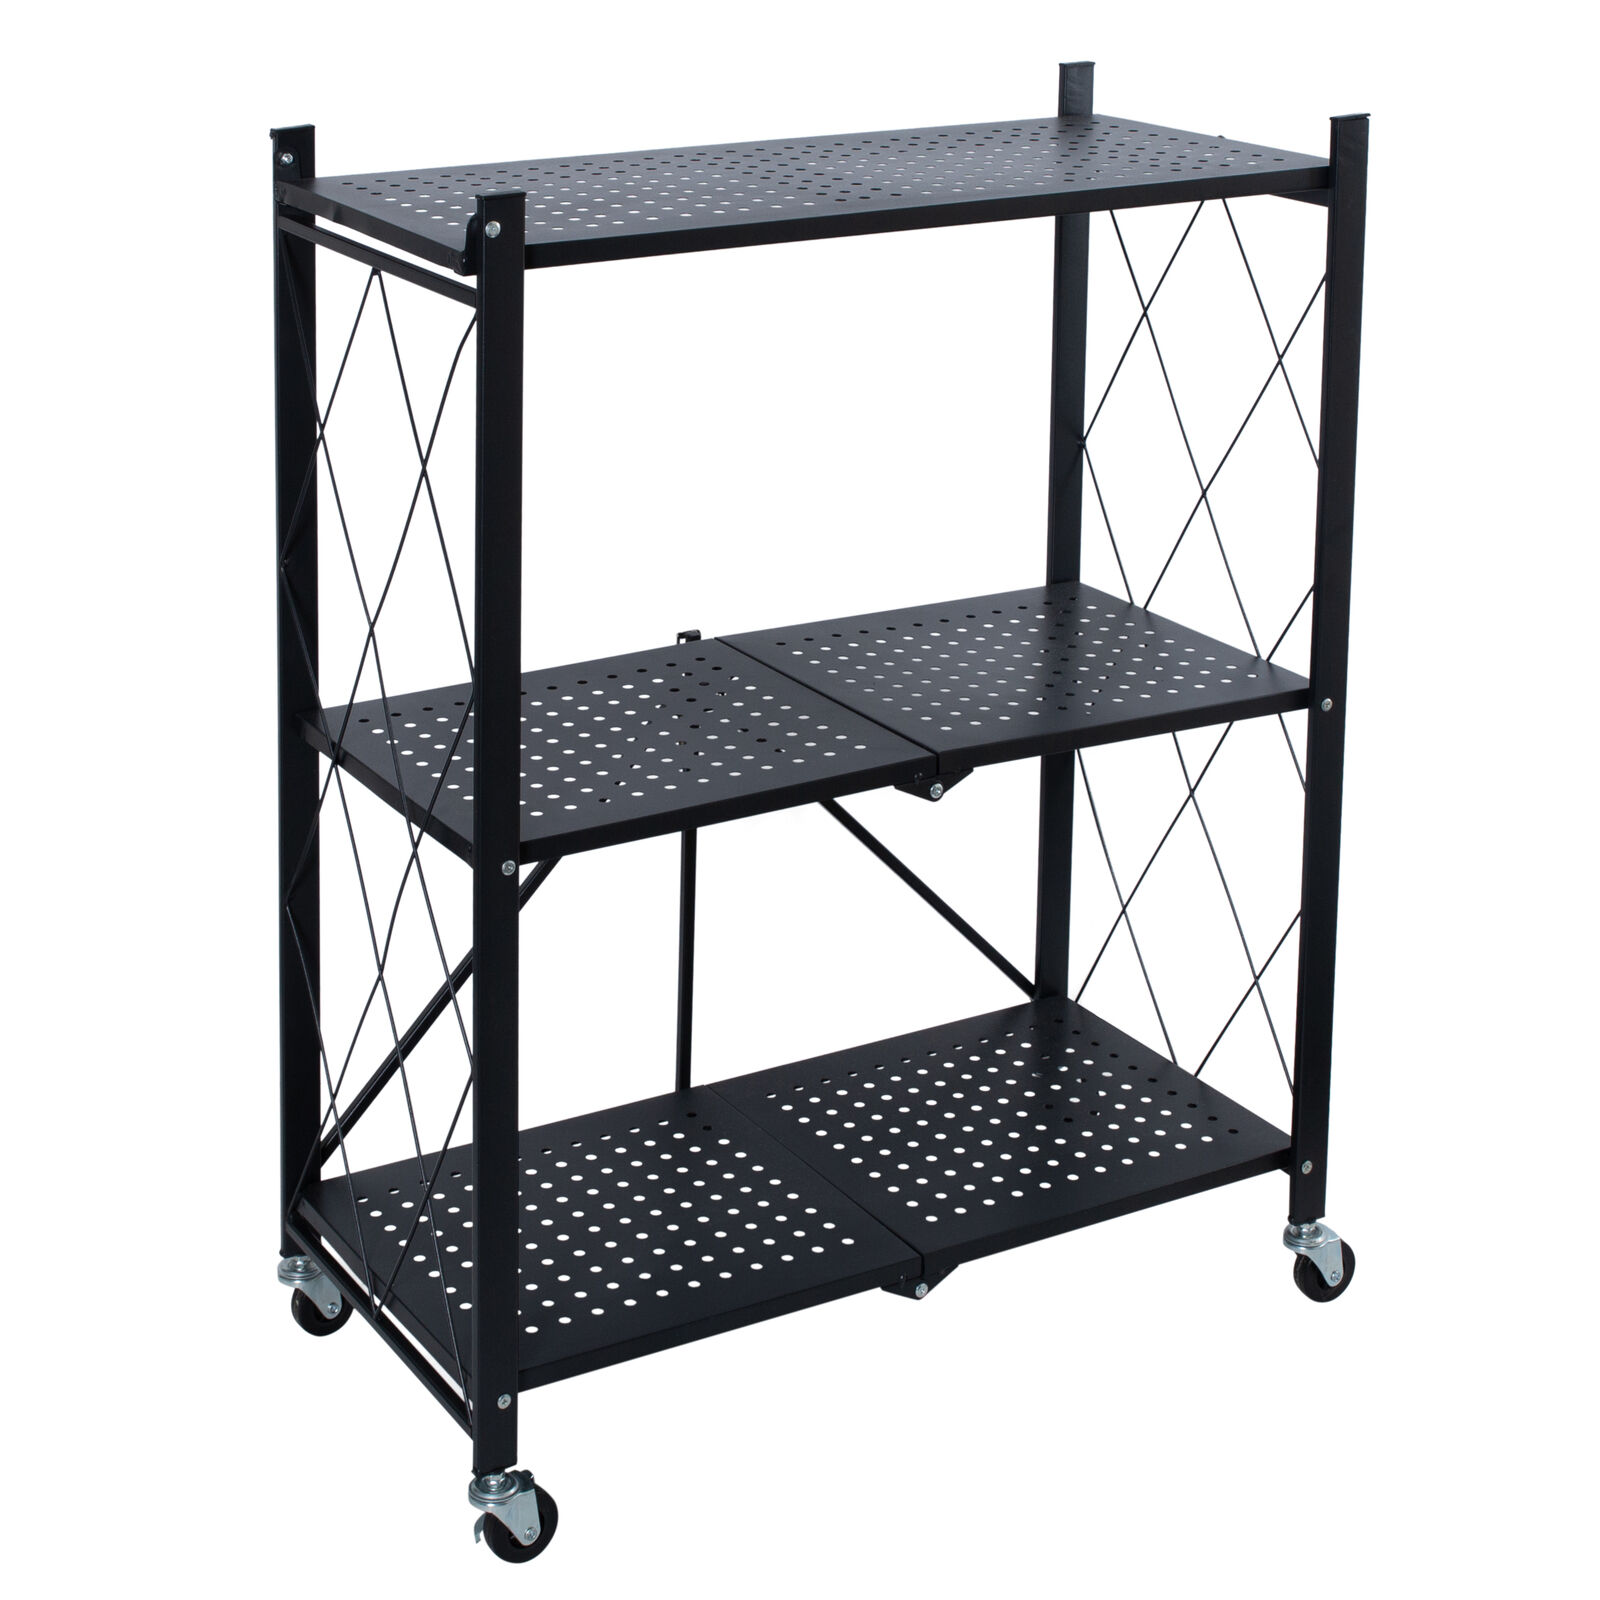 Organize It All 3 Tier Foldable Metal Rack with Wheels in Black Dimensions: 27.8